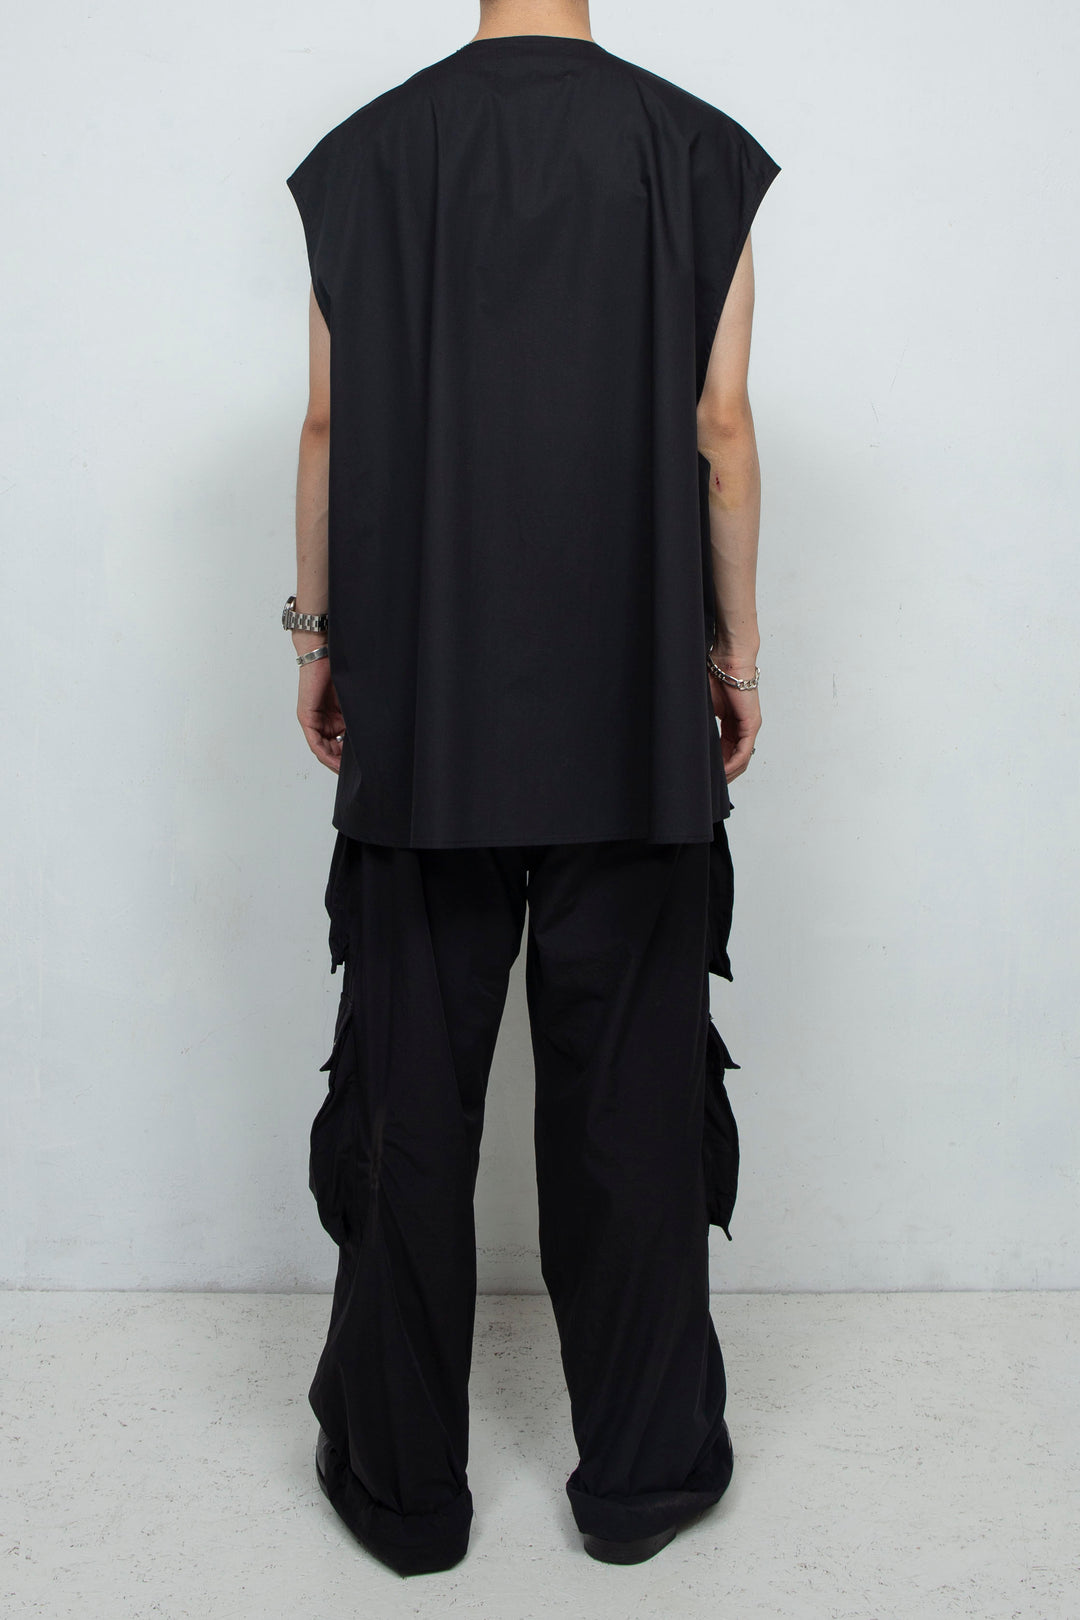 NO SLEEVE BLOUSE FOR LAYER BLACK